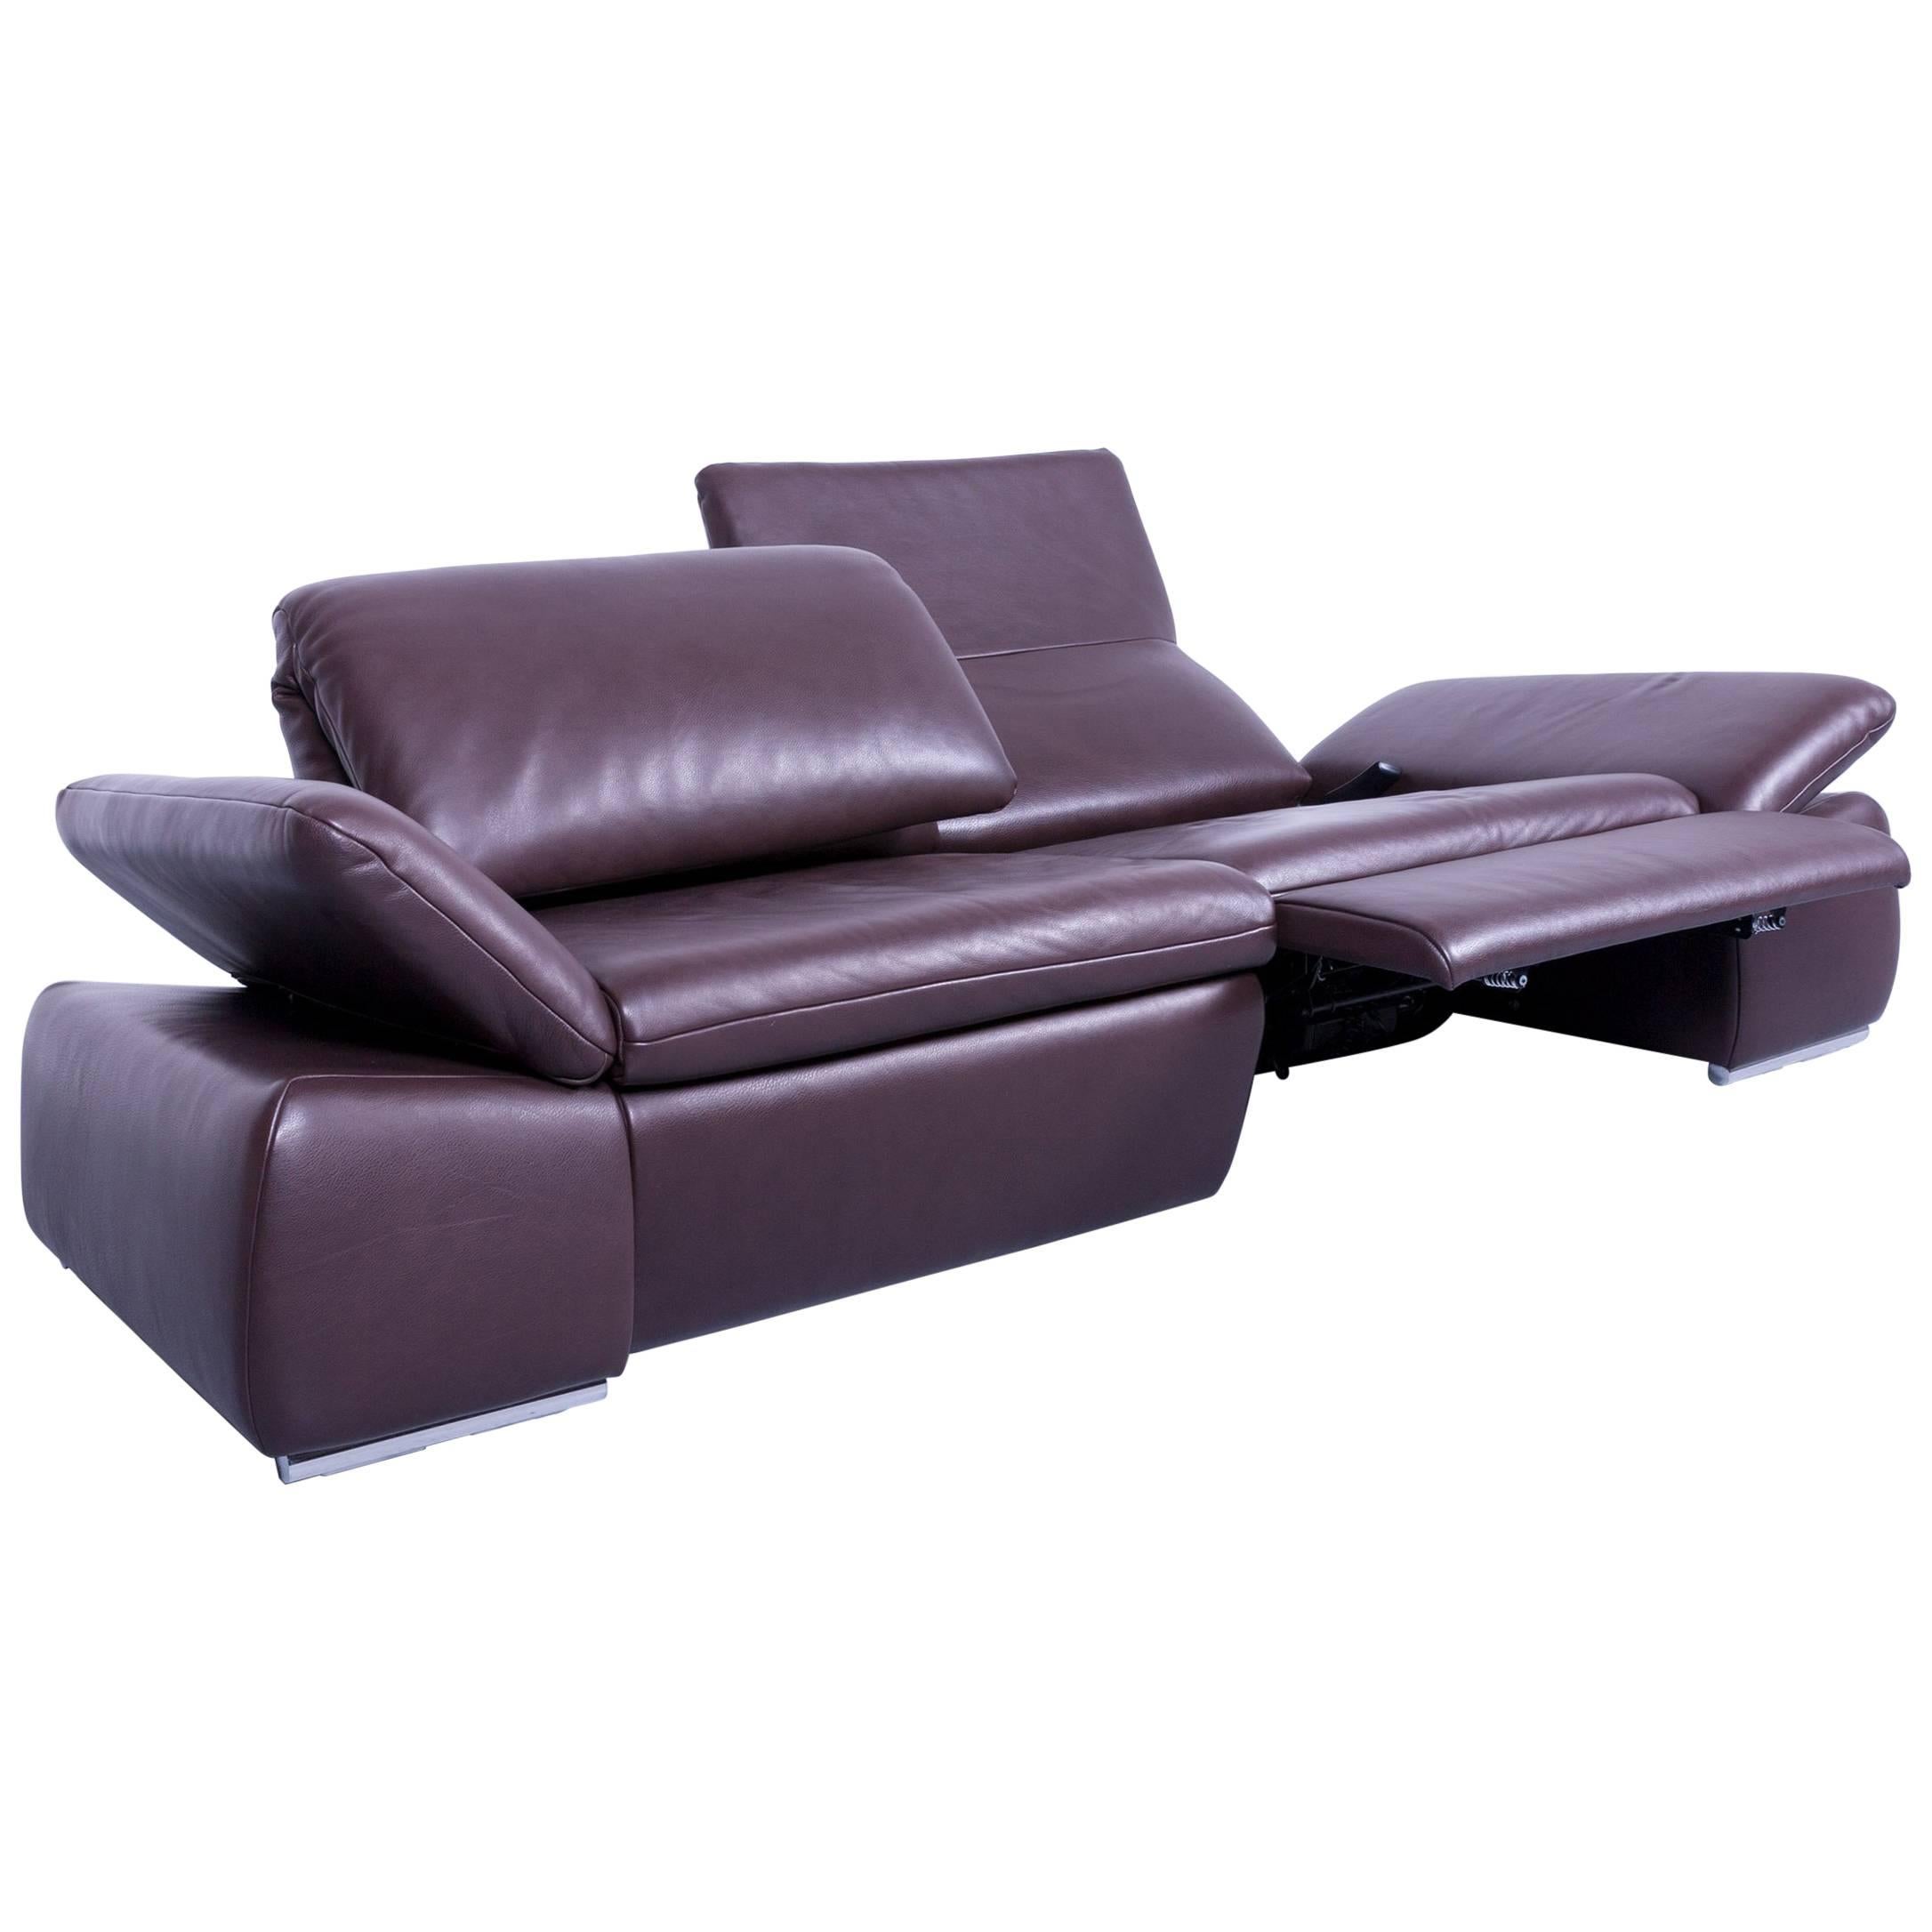 Koinor Evento Designer Sofa Brown Mocca Leather Electric Function Modern For Sale